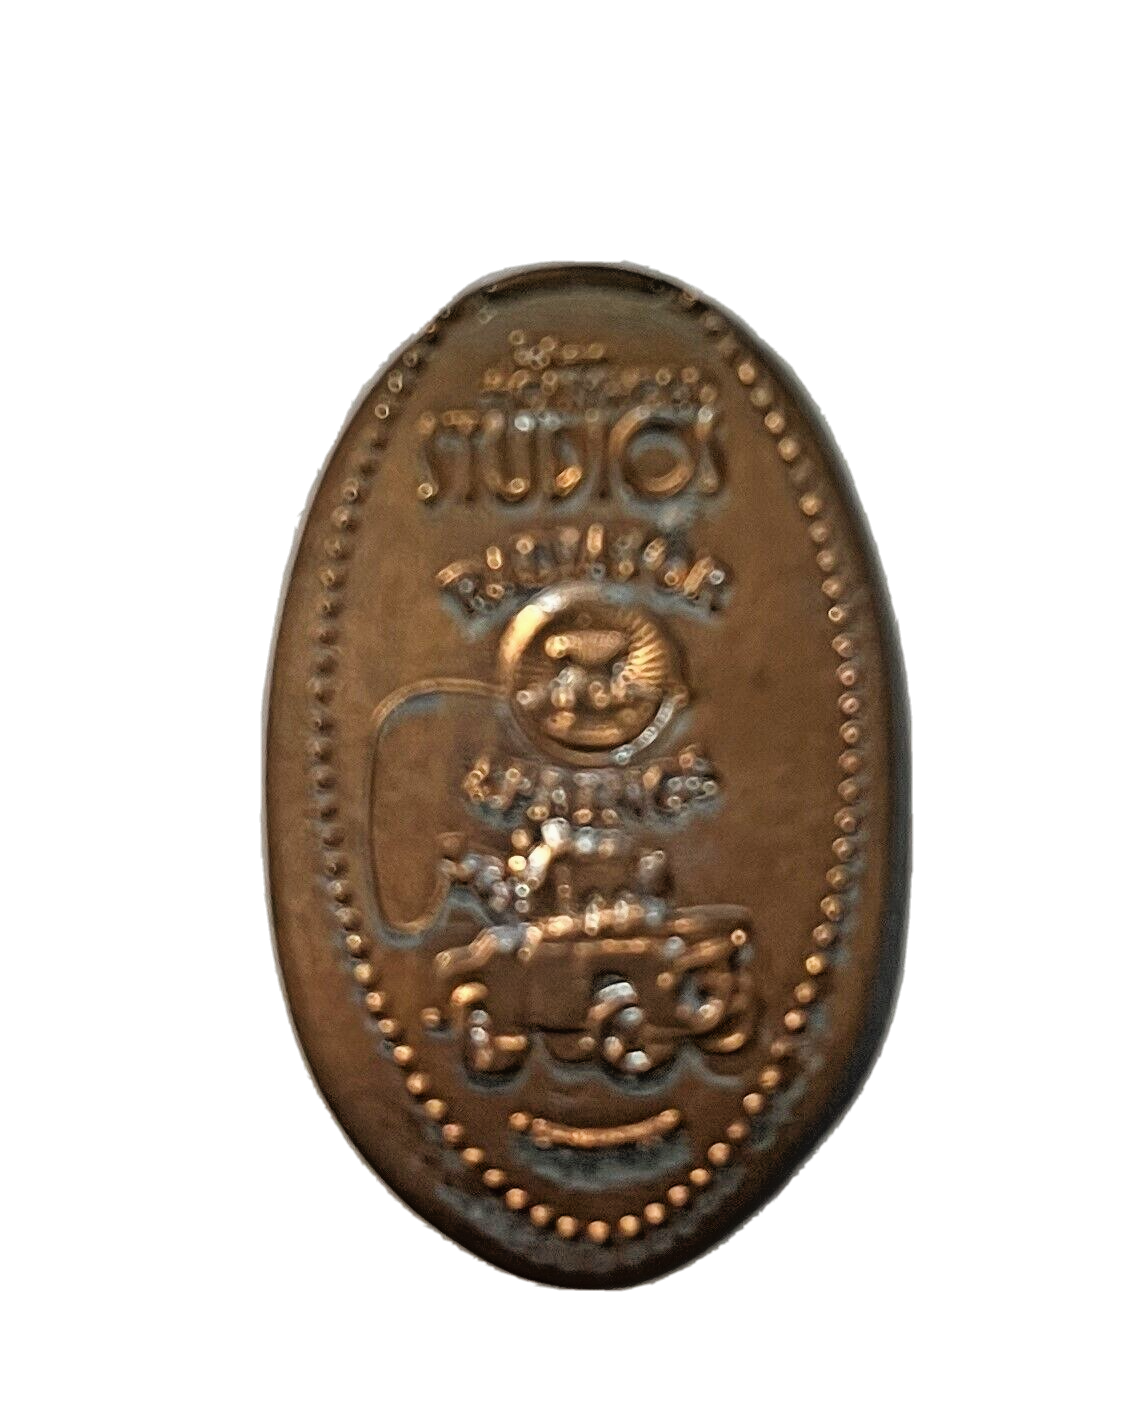 Primary image for Mater  "RADIATOR SPRINGS"  (Cars) - Disney Elongated Pressed Penny/Coin - WDW